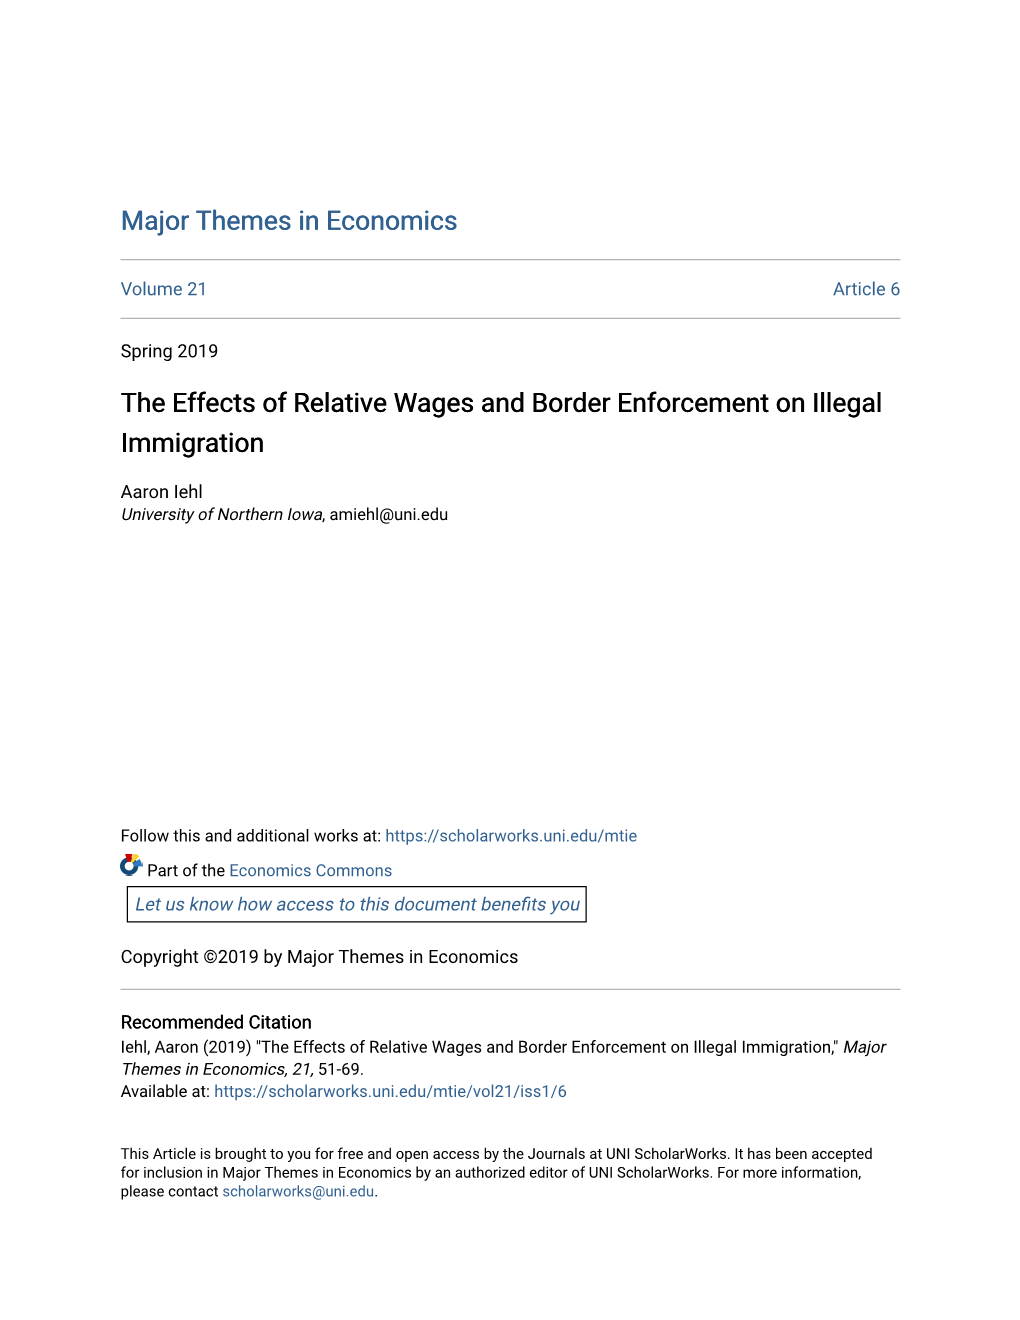 The Effects of Relative Wages and Border Enforcement on Illegal Immigration